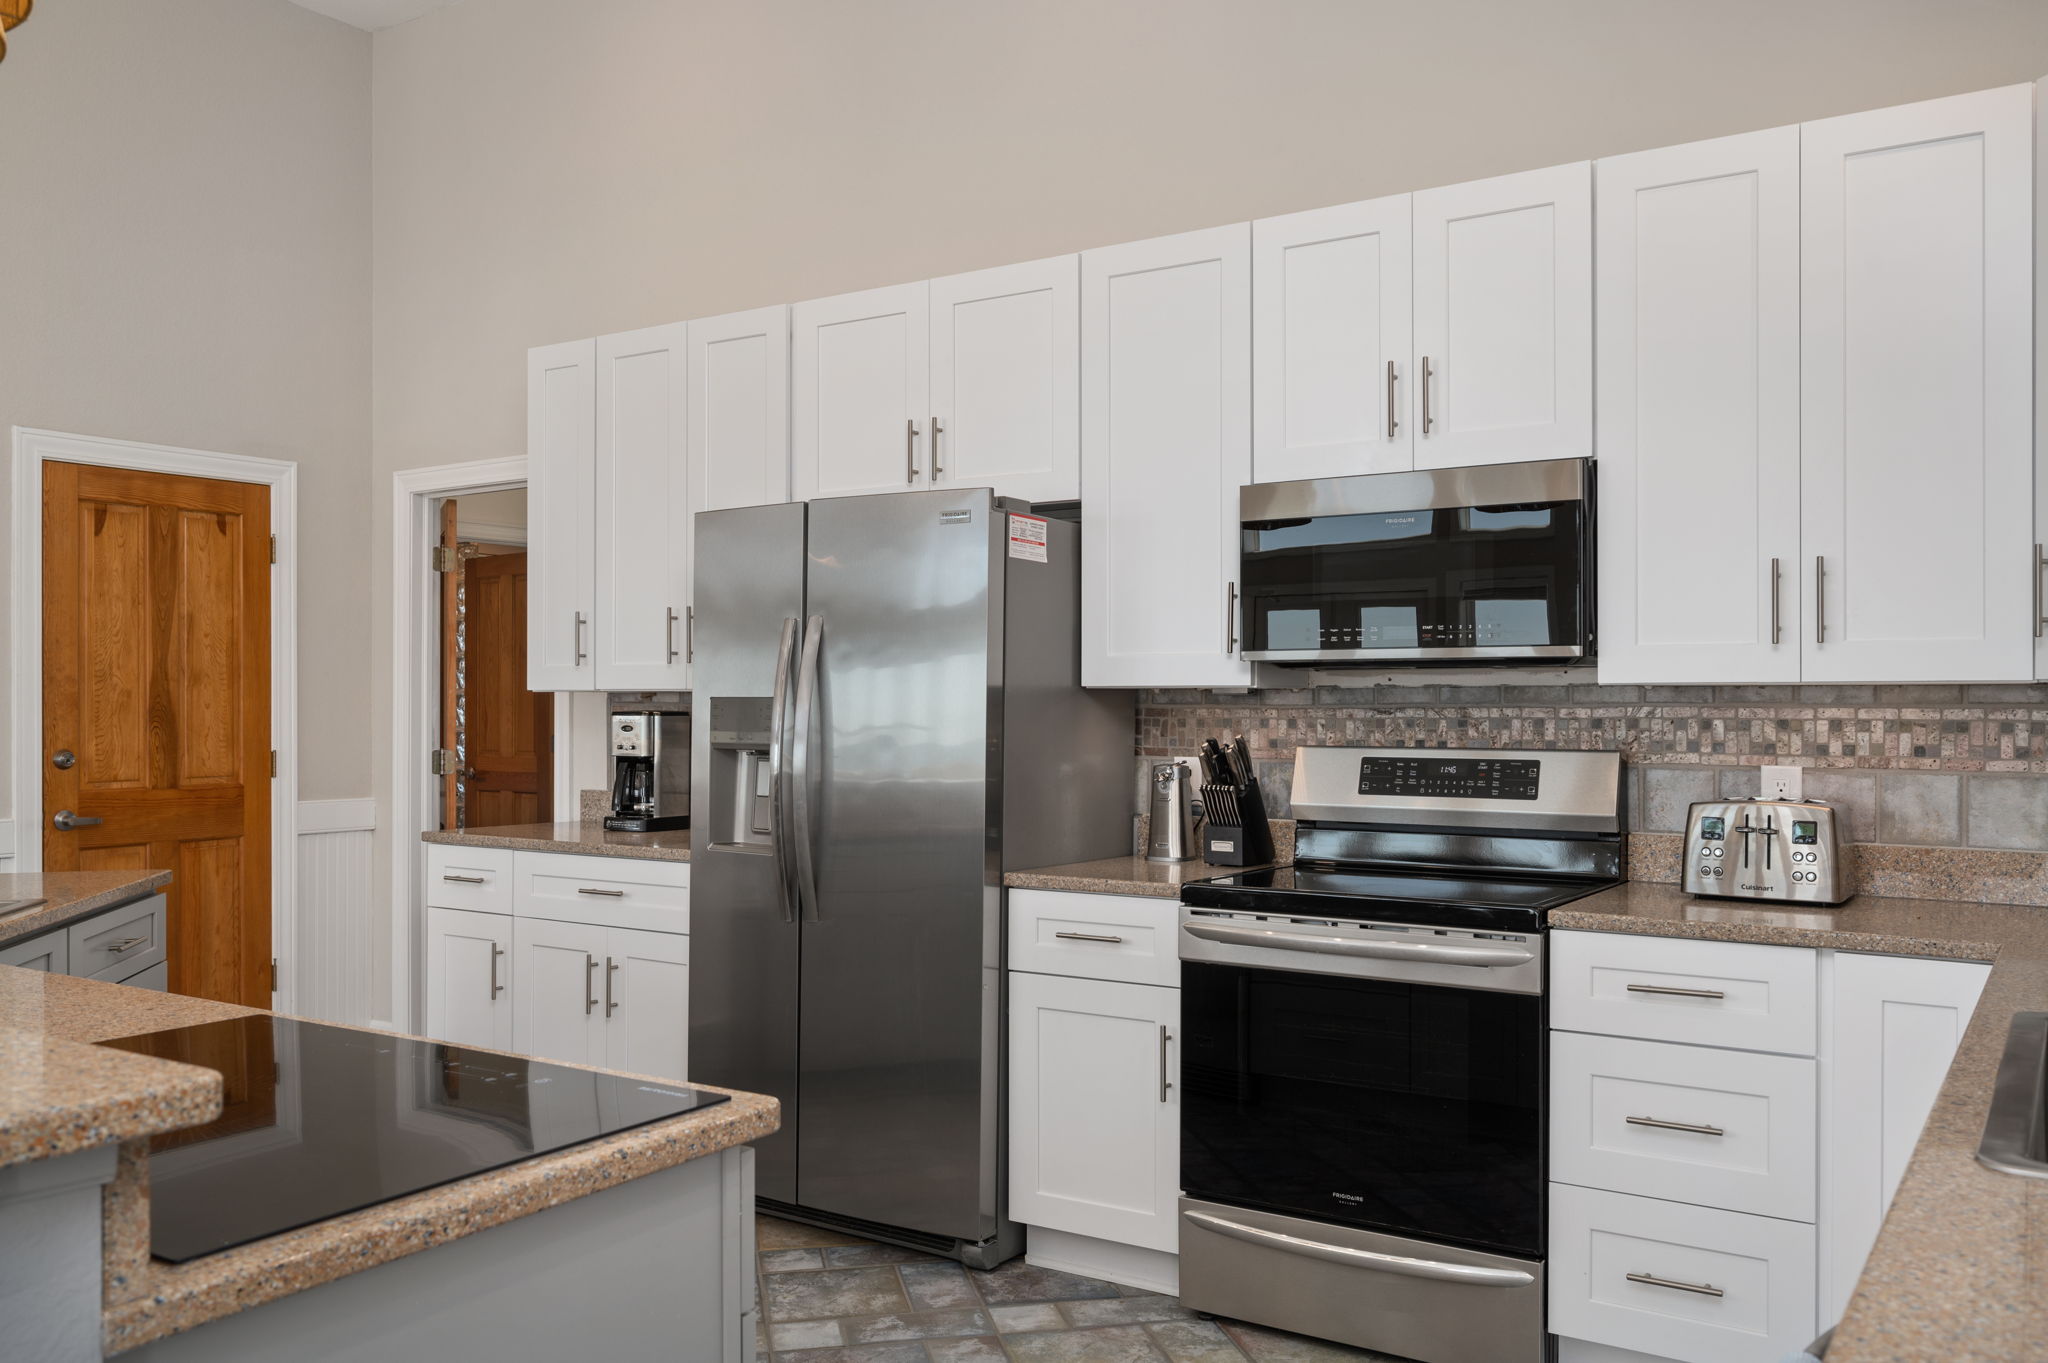 57216 Summerplace Dr | Top Level Kitchen